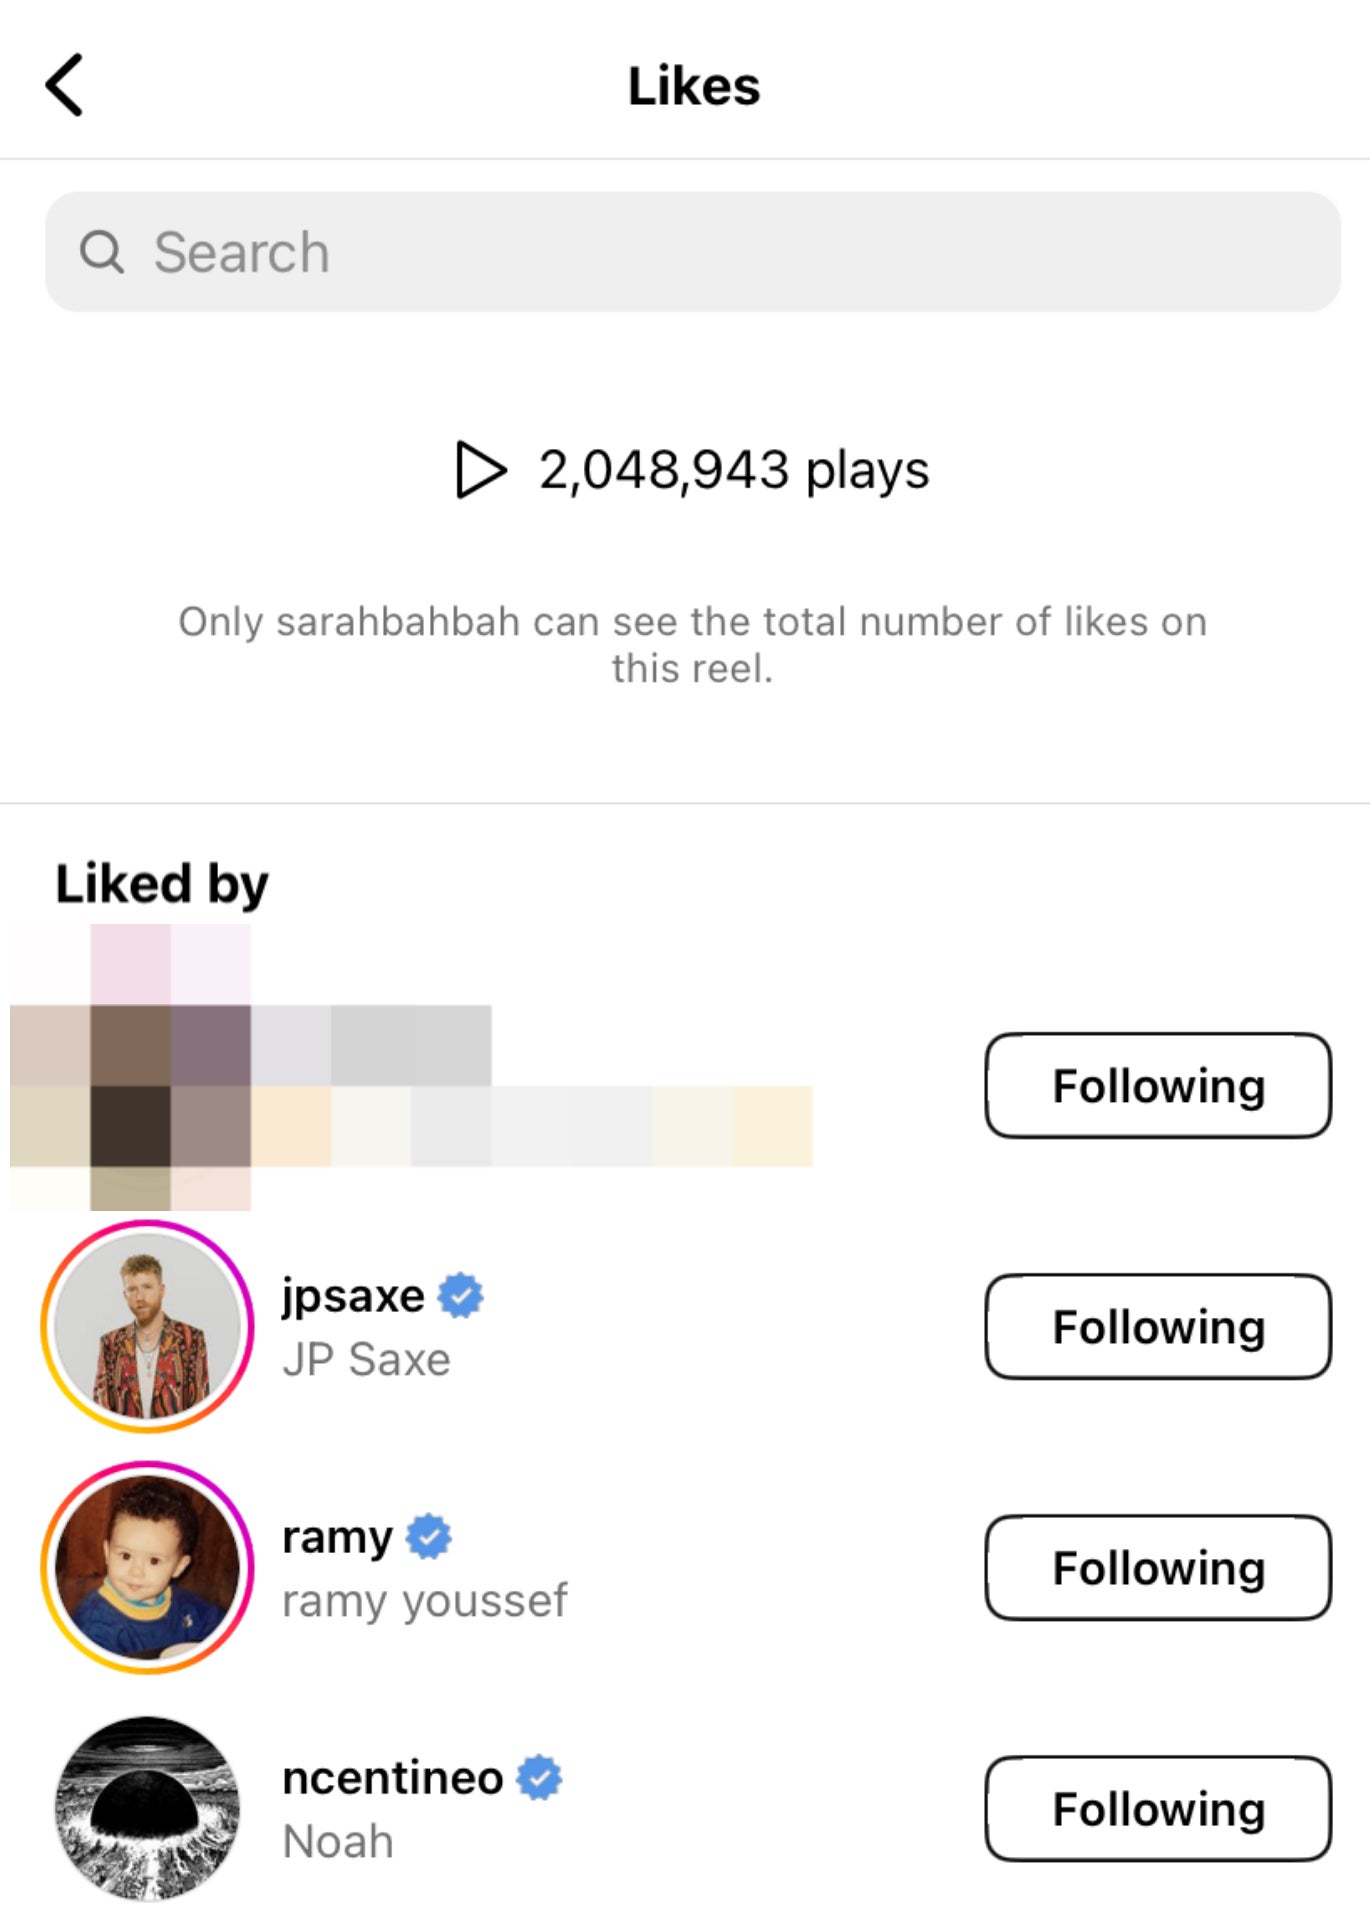 Screenshot of a social media app showing a post with over 2,000 likes and the three mentioned celeb user profiles who liked it